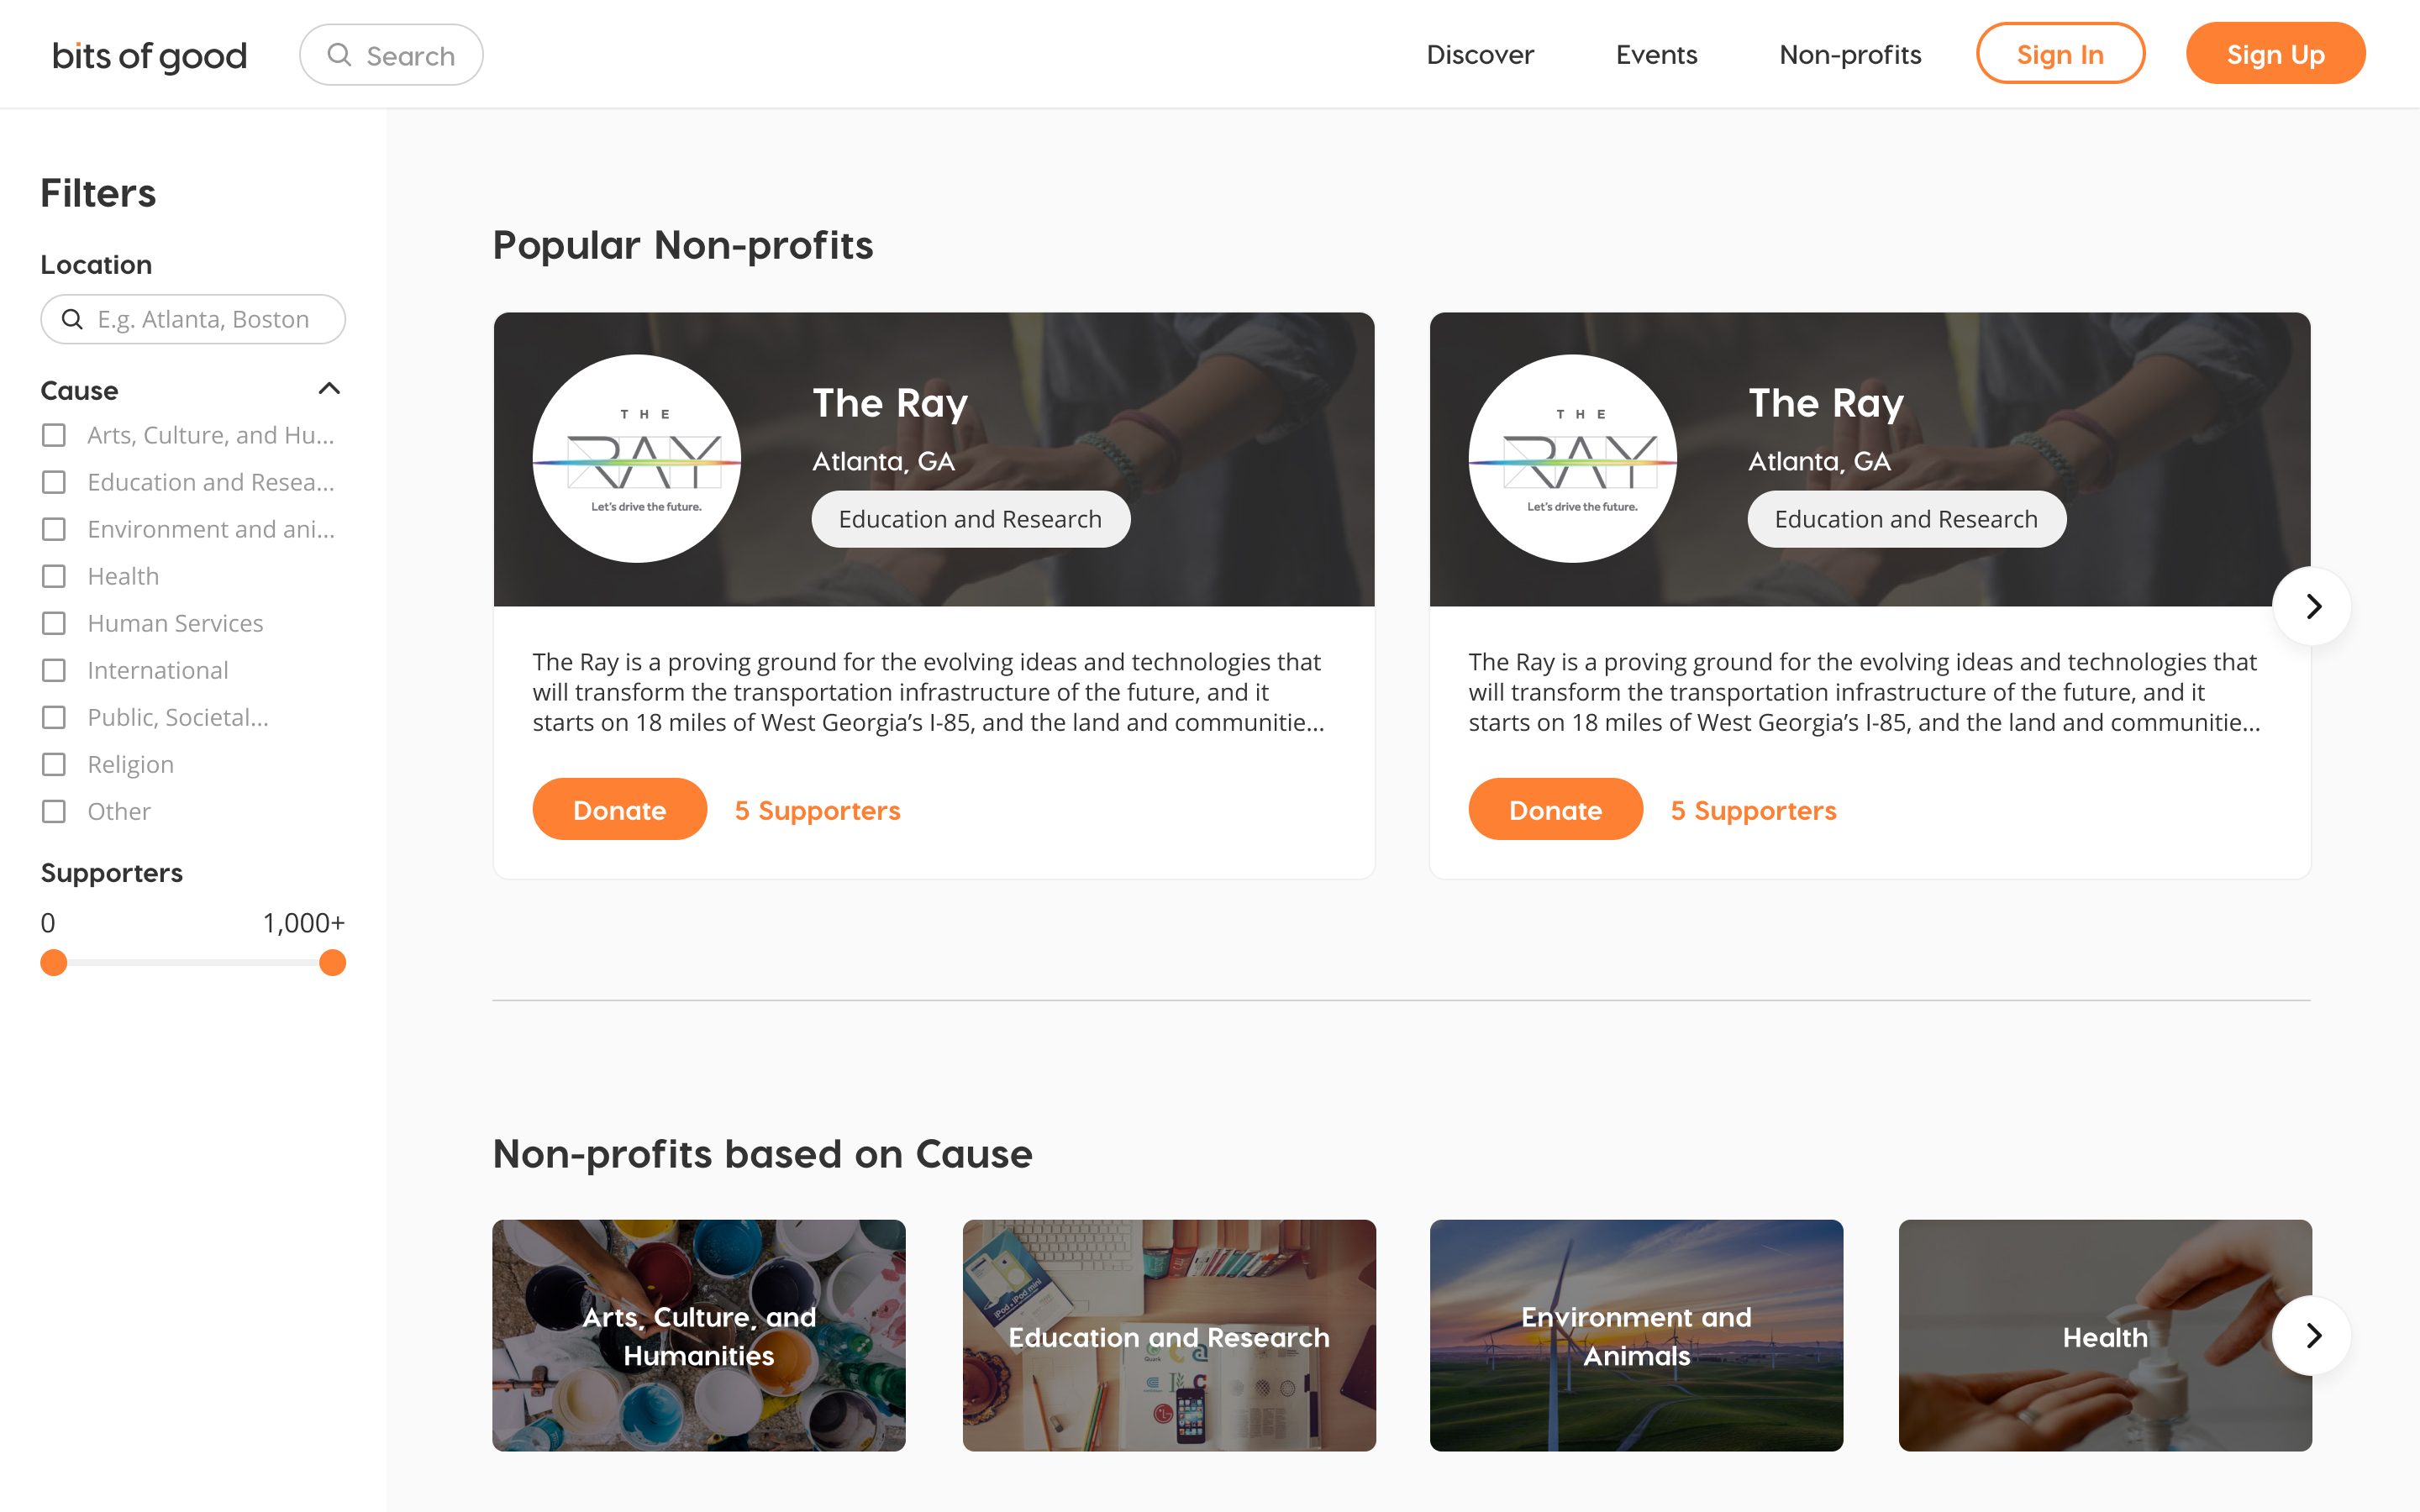 Landing screen for the Non-profits page. Shows popular non-profits and the ability to filter non-profits by impact cause.